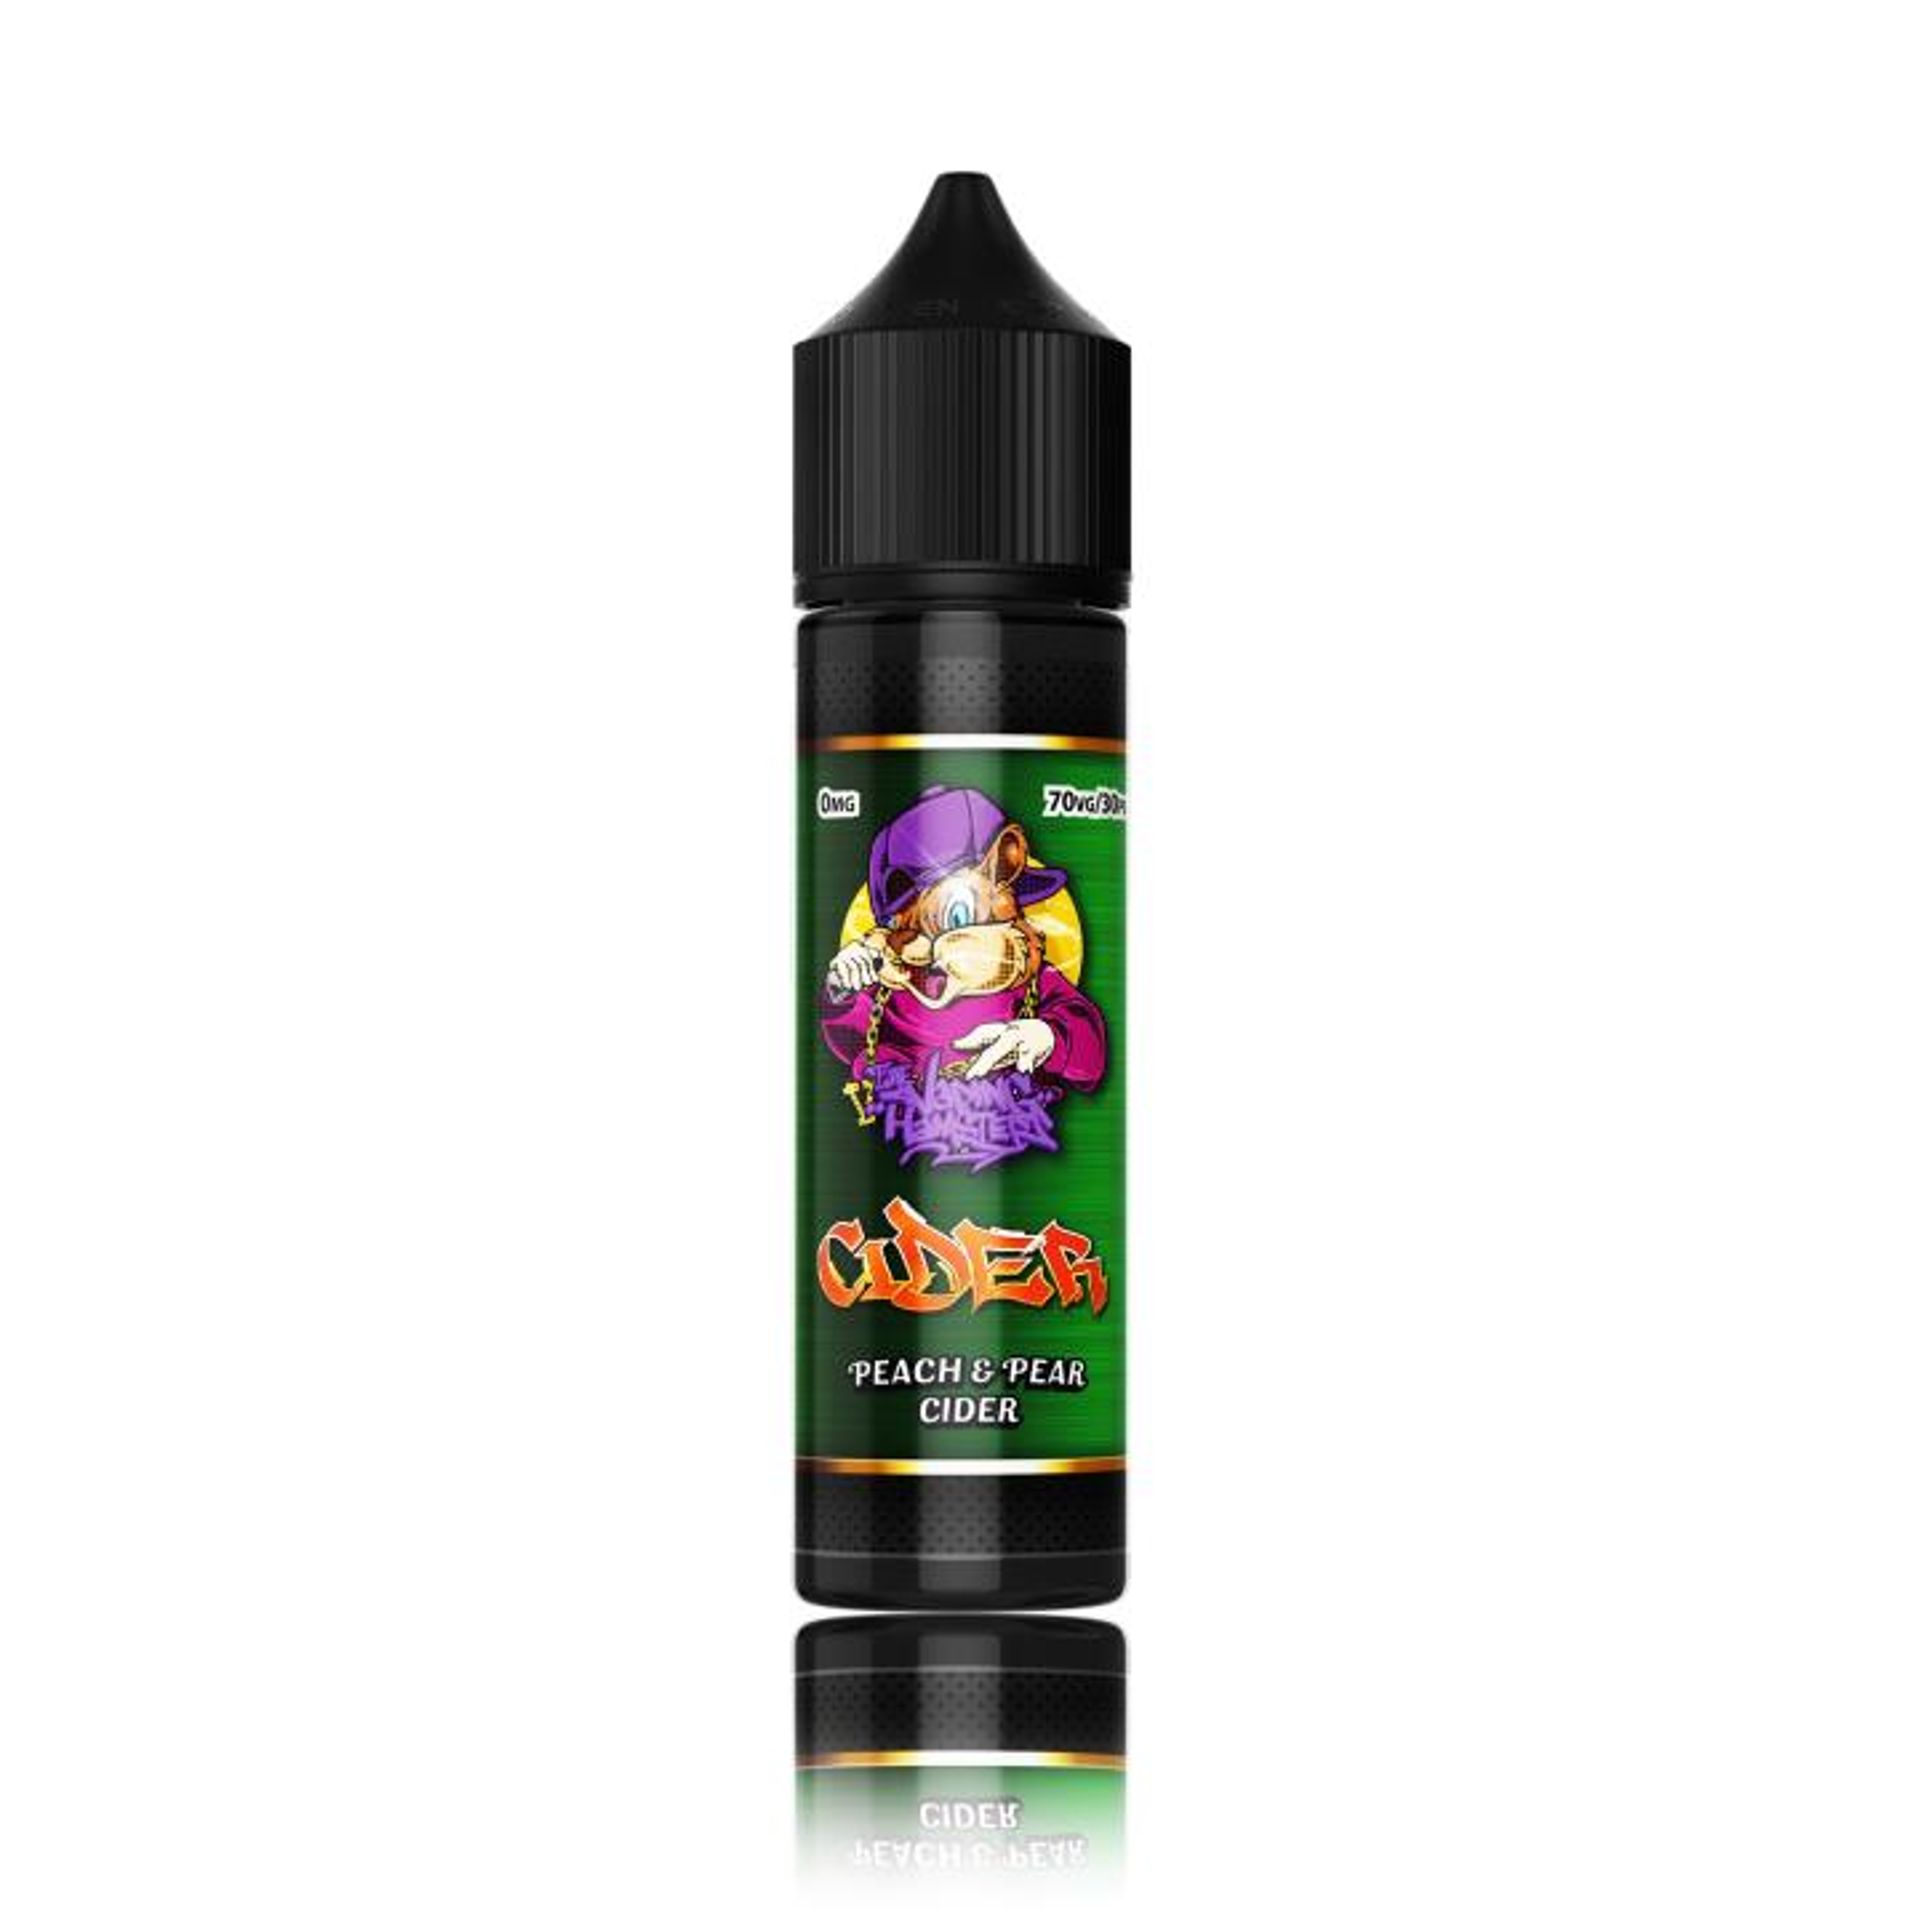 Image of Peach & Pear Cider by The Vaping Hamster